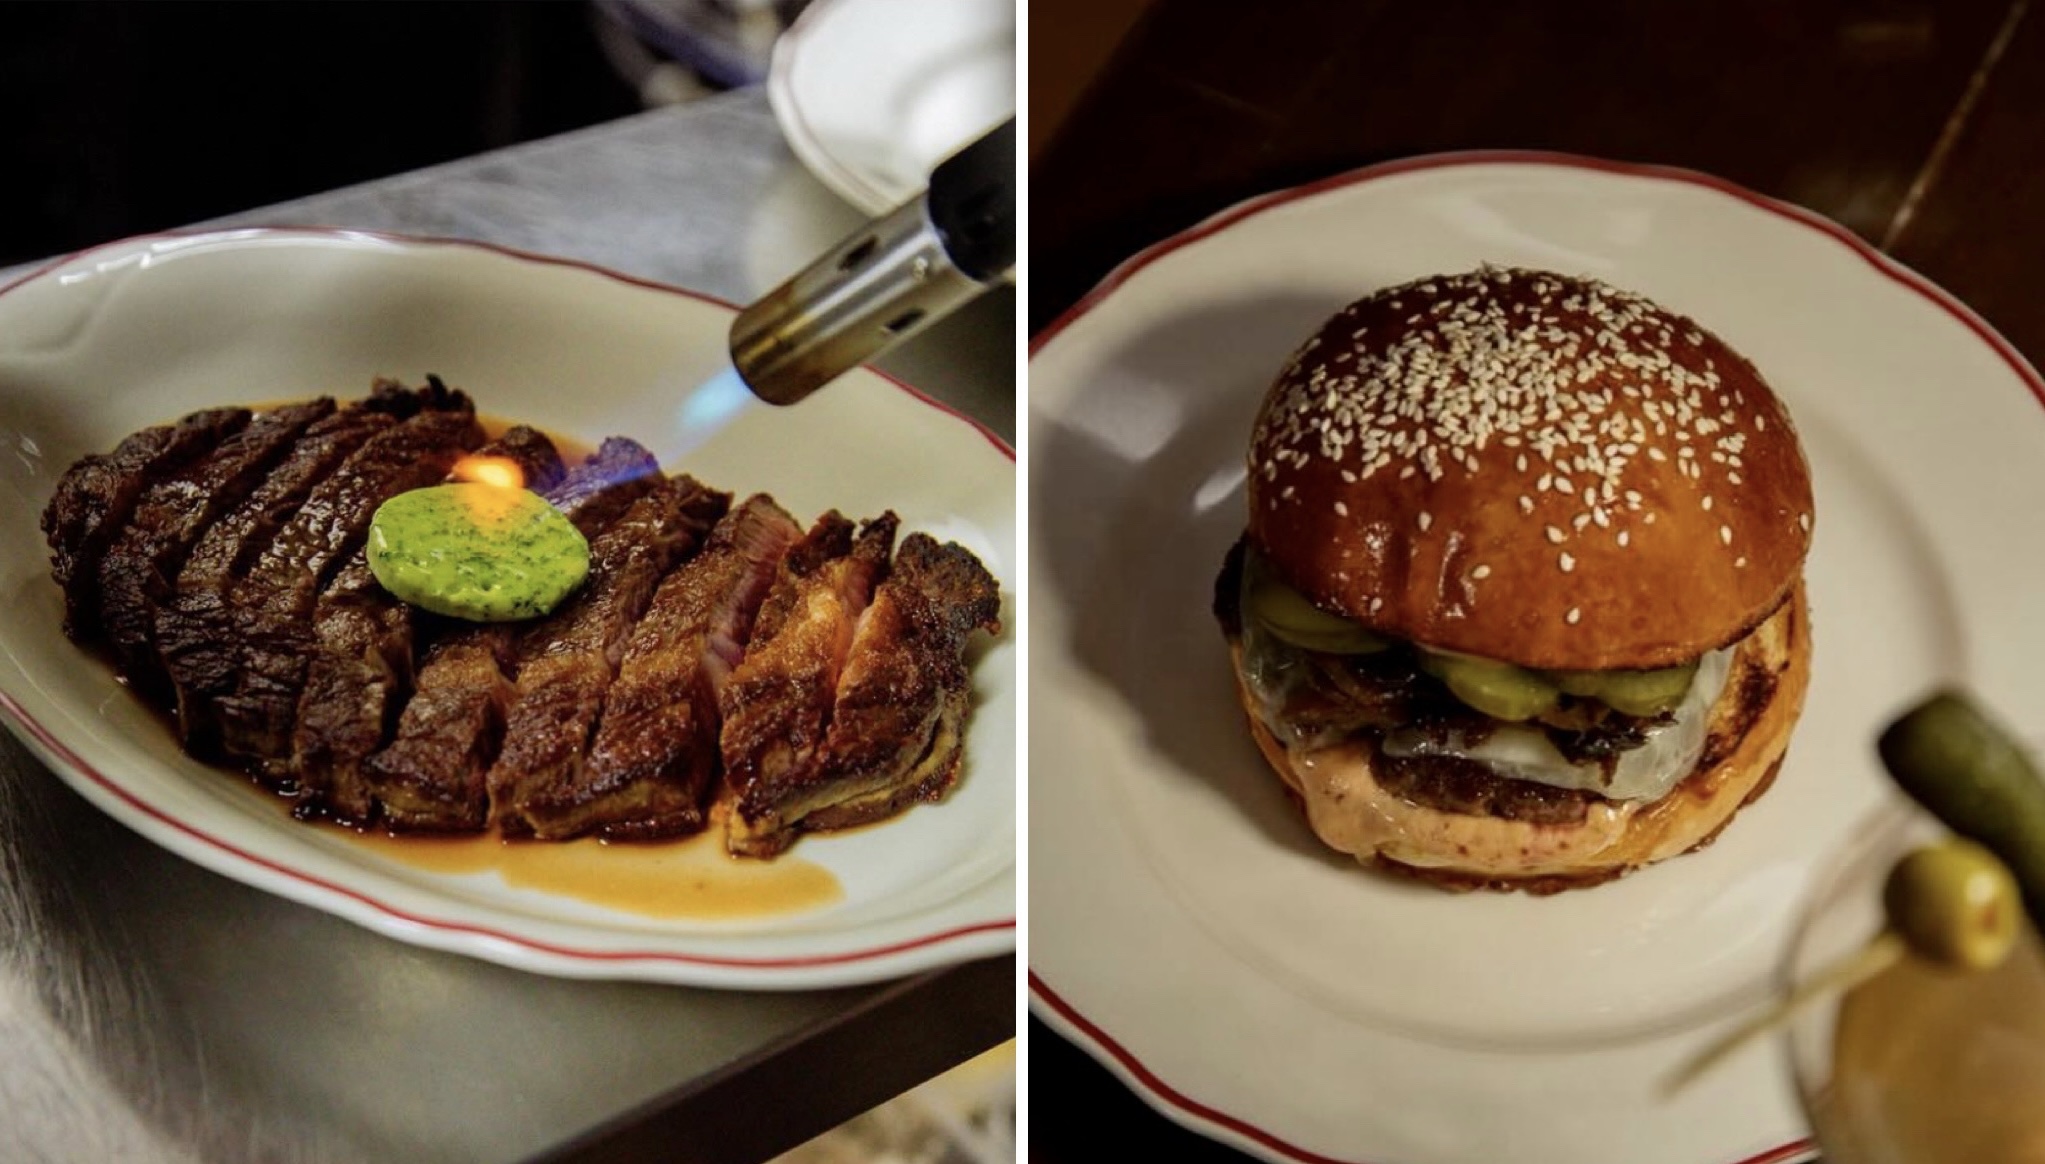 Lou’s in Pointe-Claire is part swanky steakhouse, part diner, with what might be the perfect burger